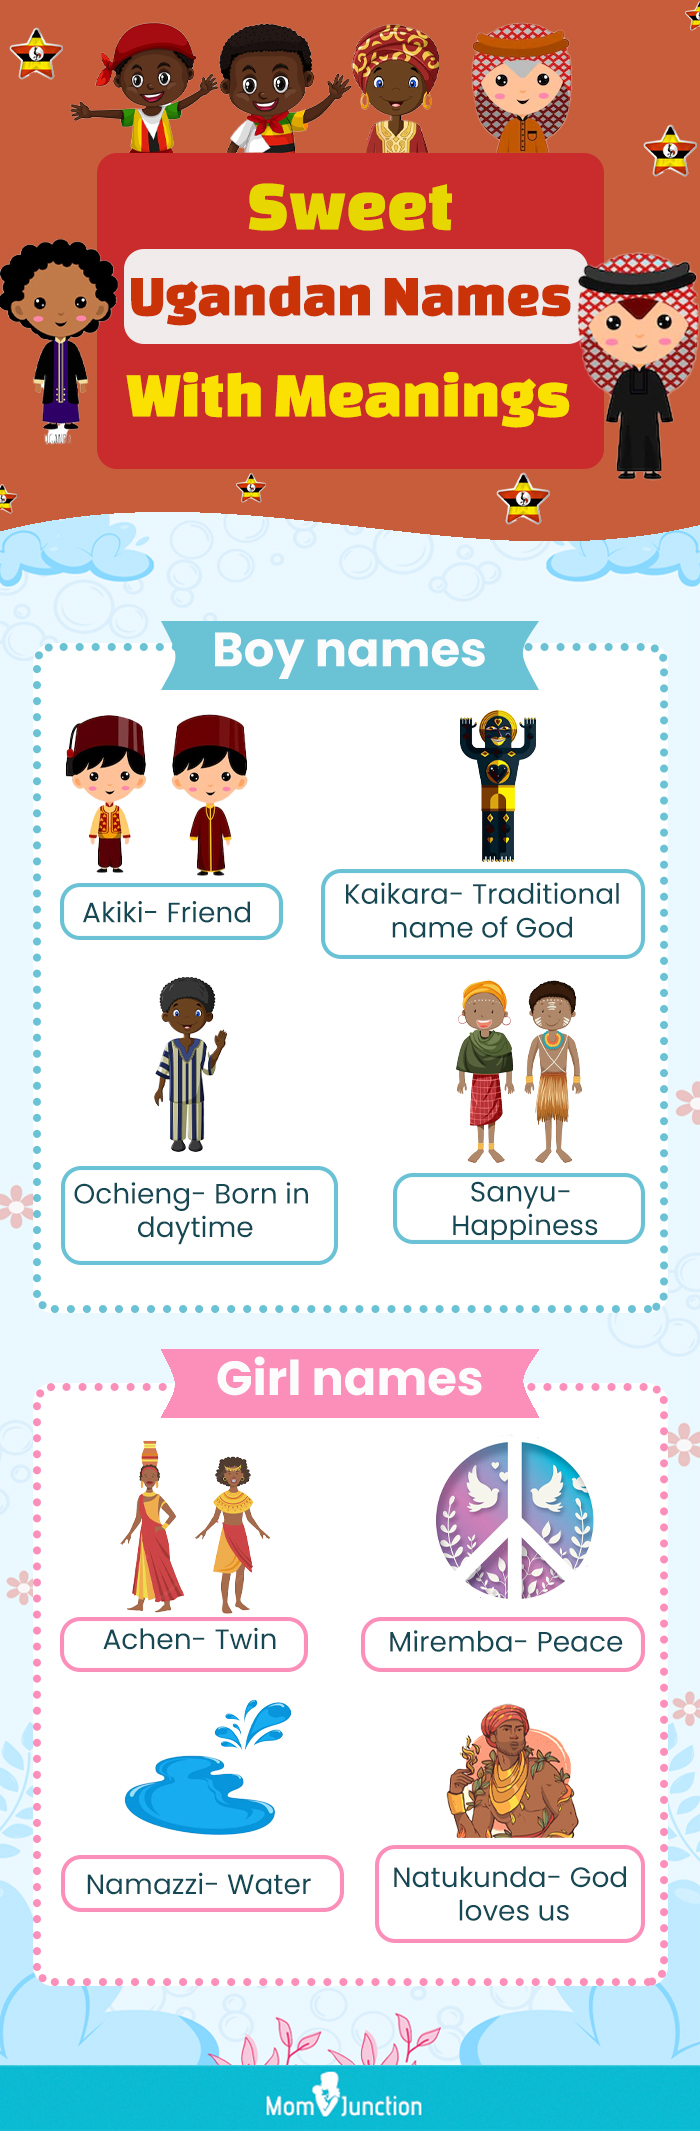 sweet ugandan names with meanings (infographic)